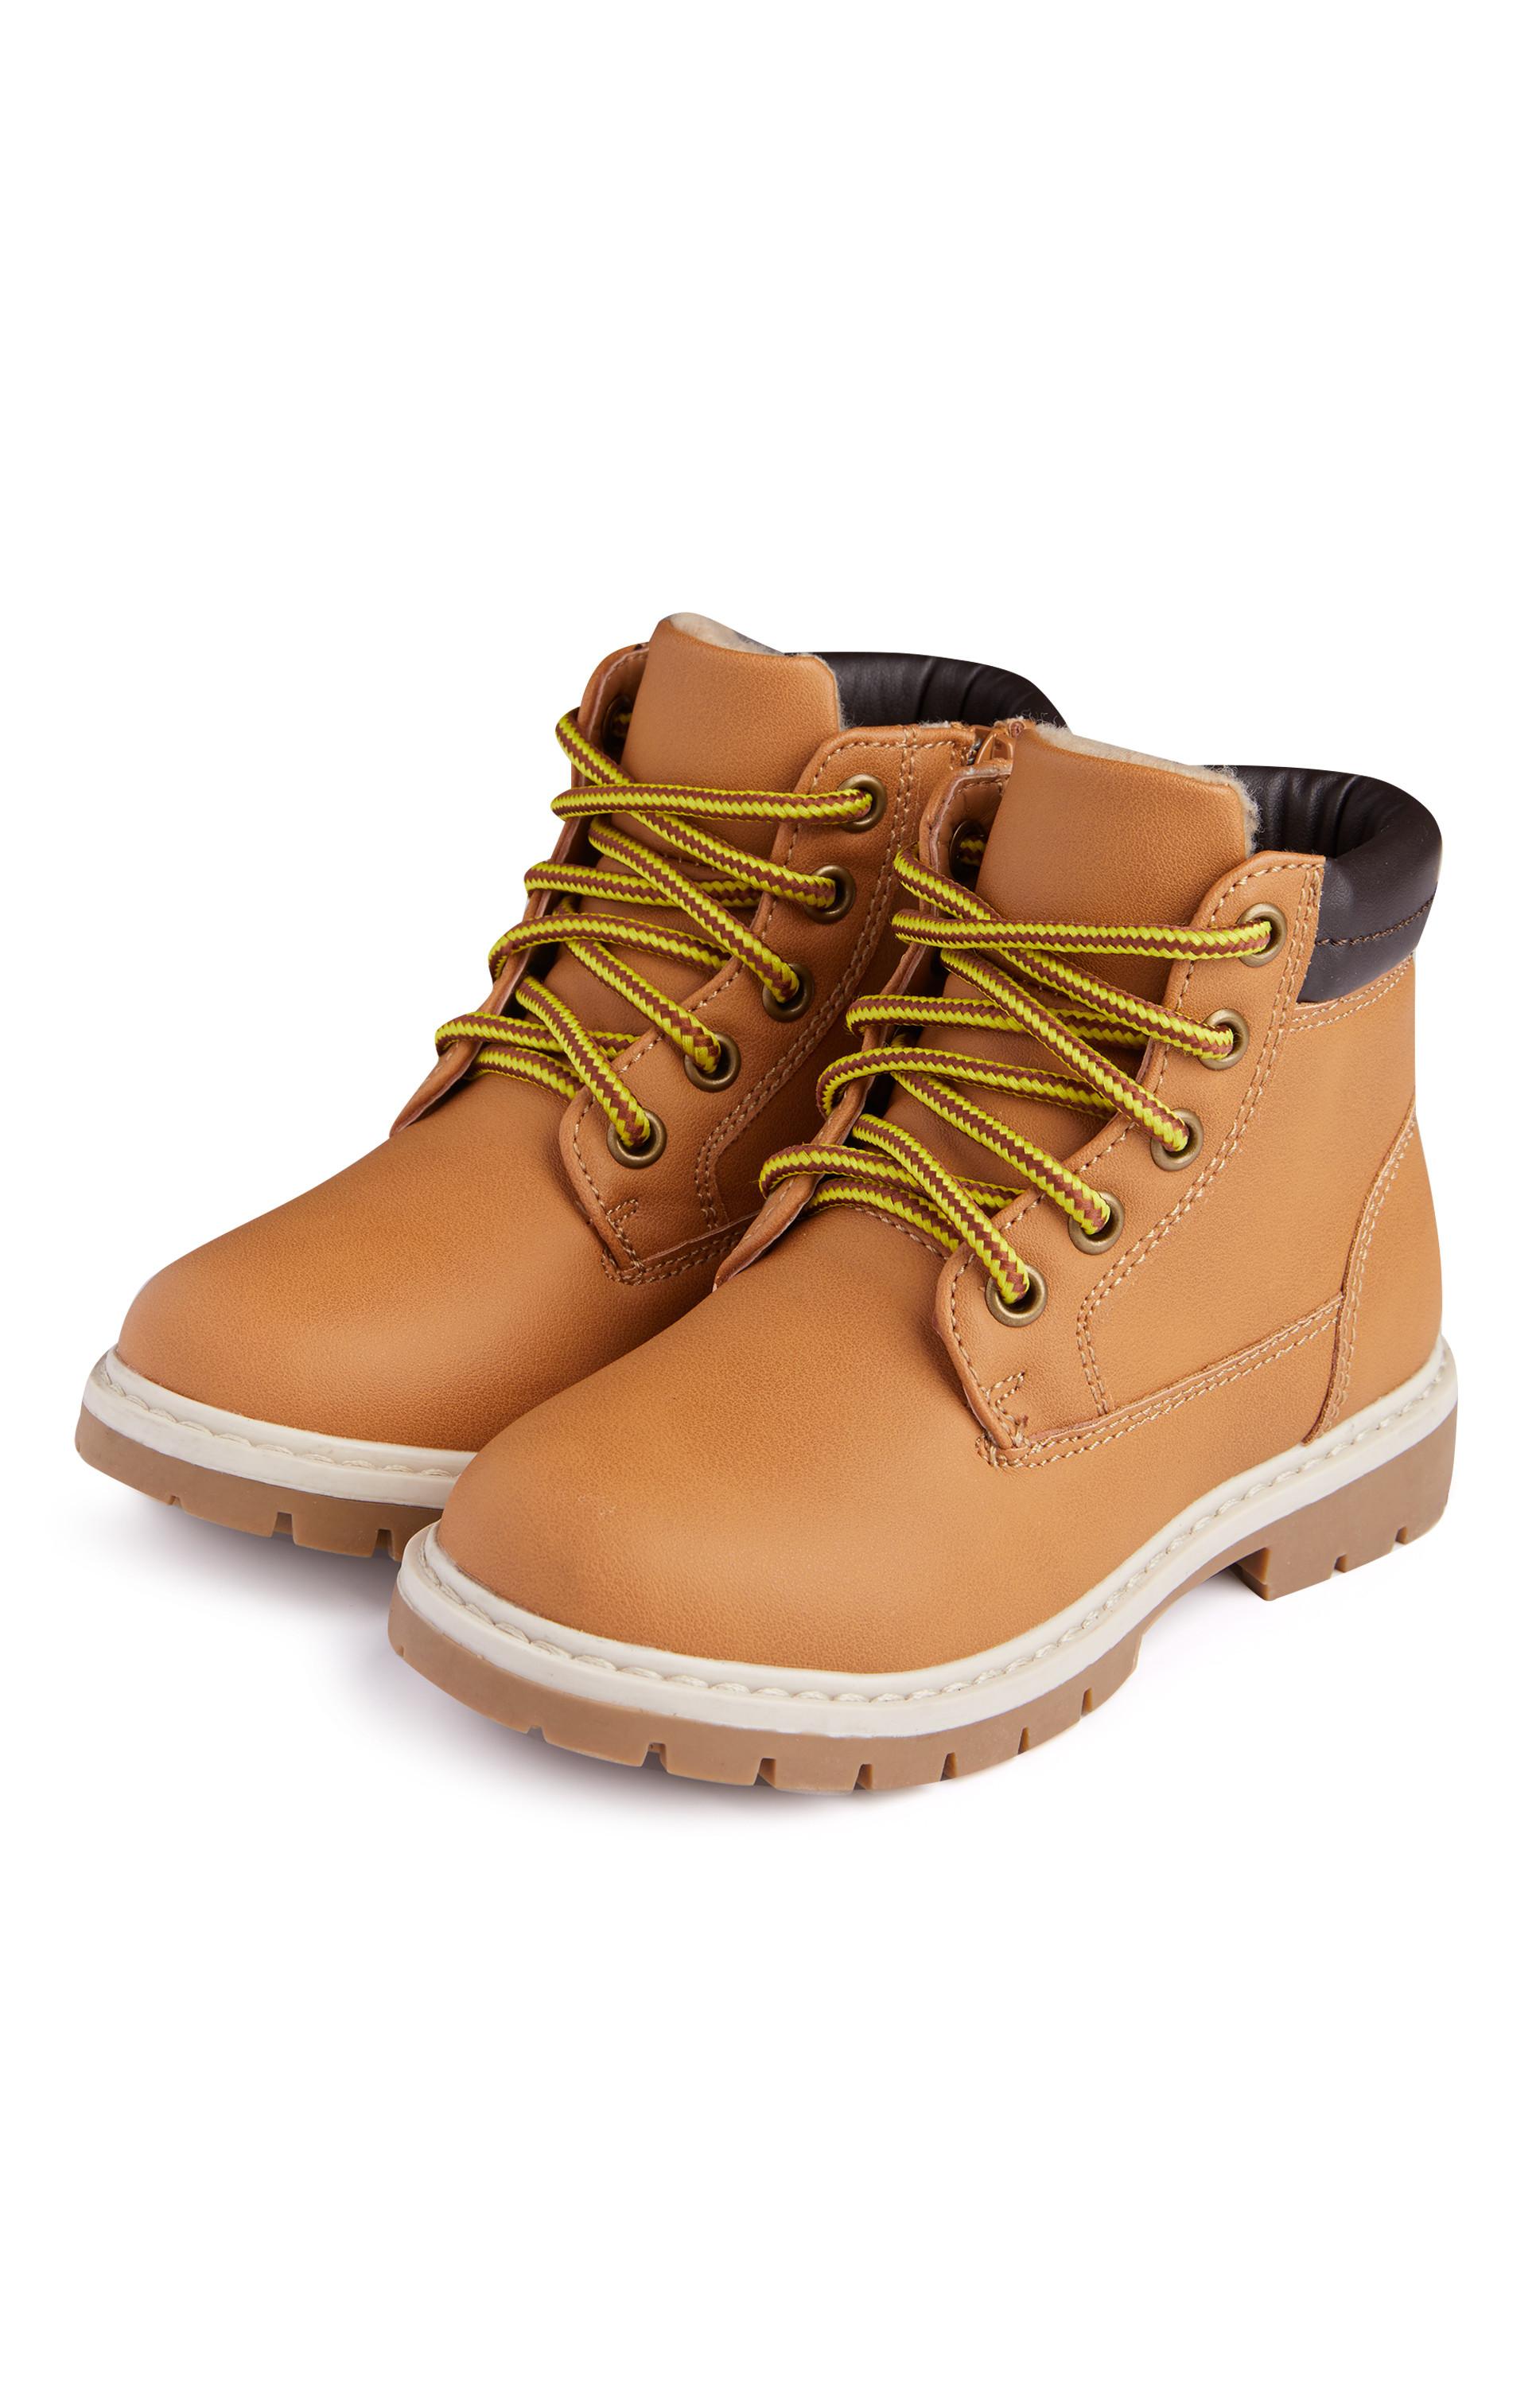 primark timberland style boots